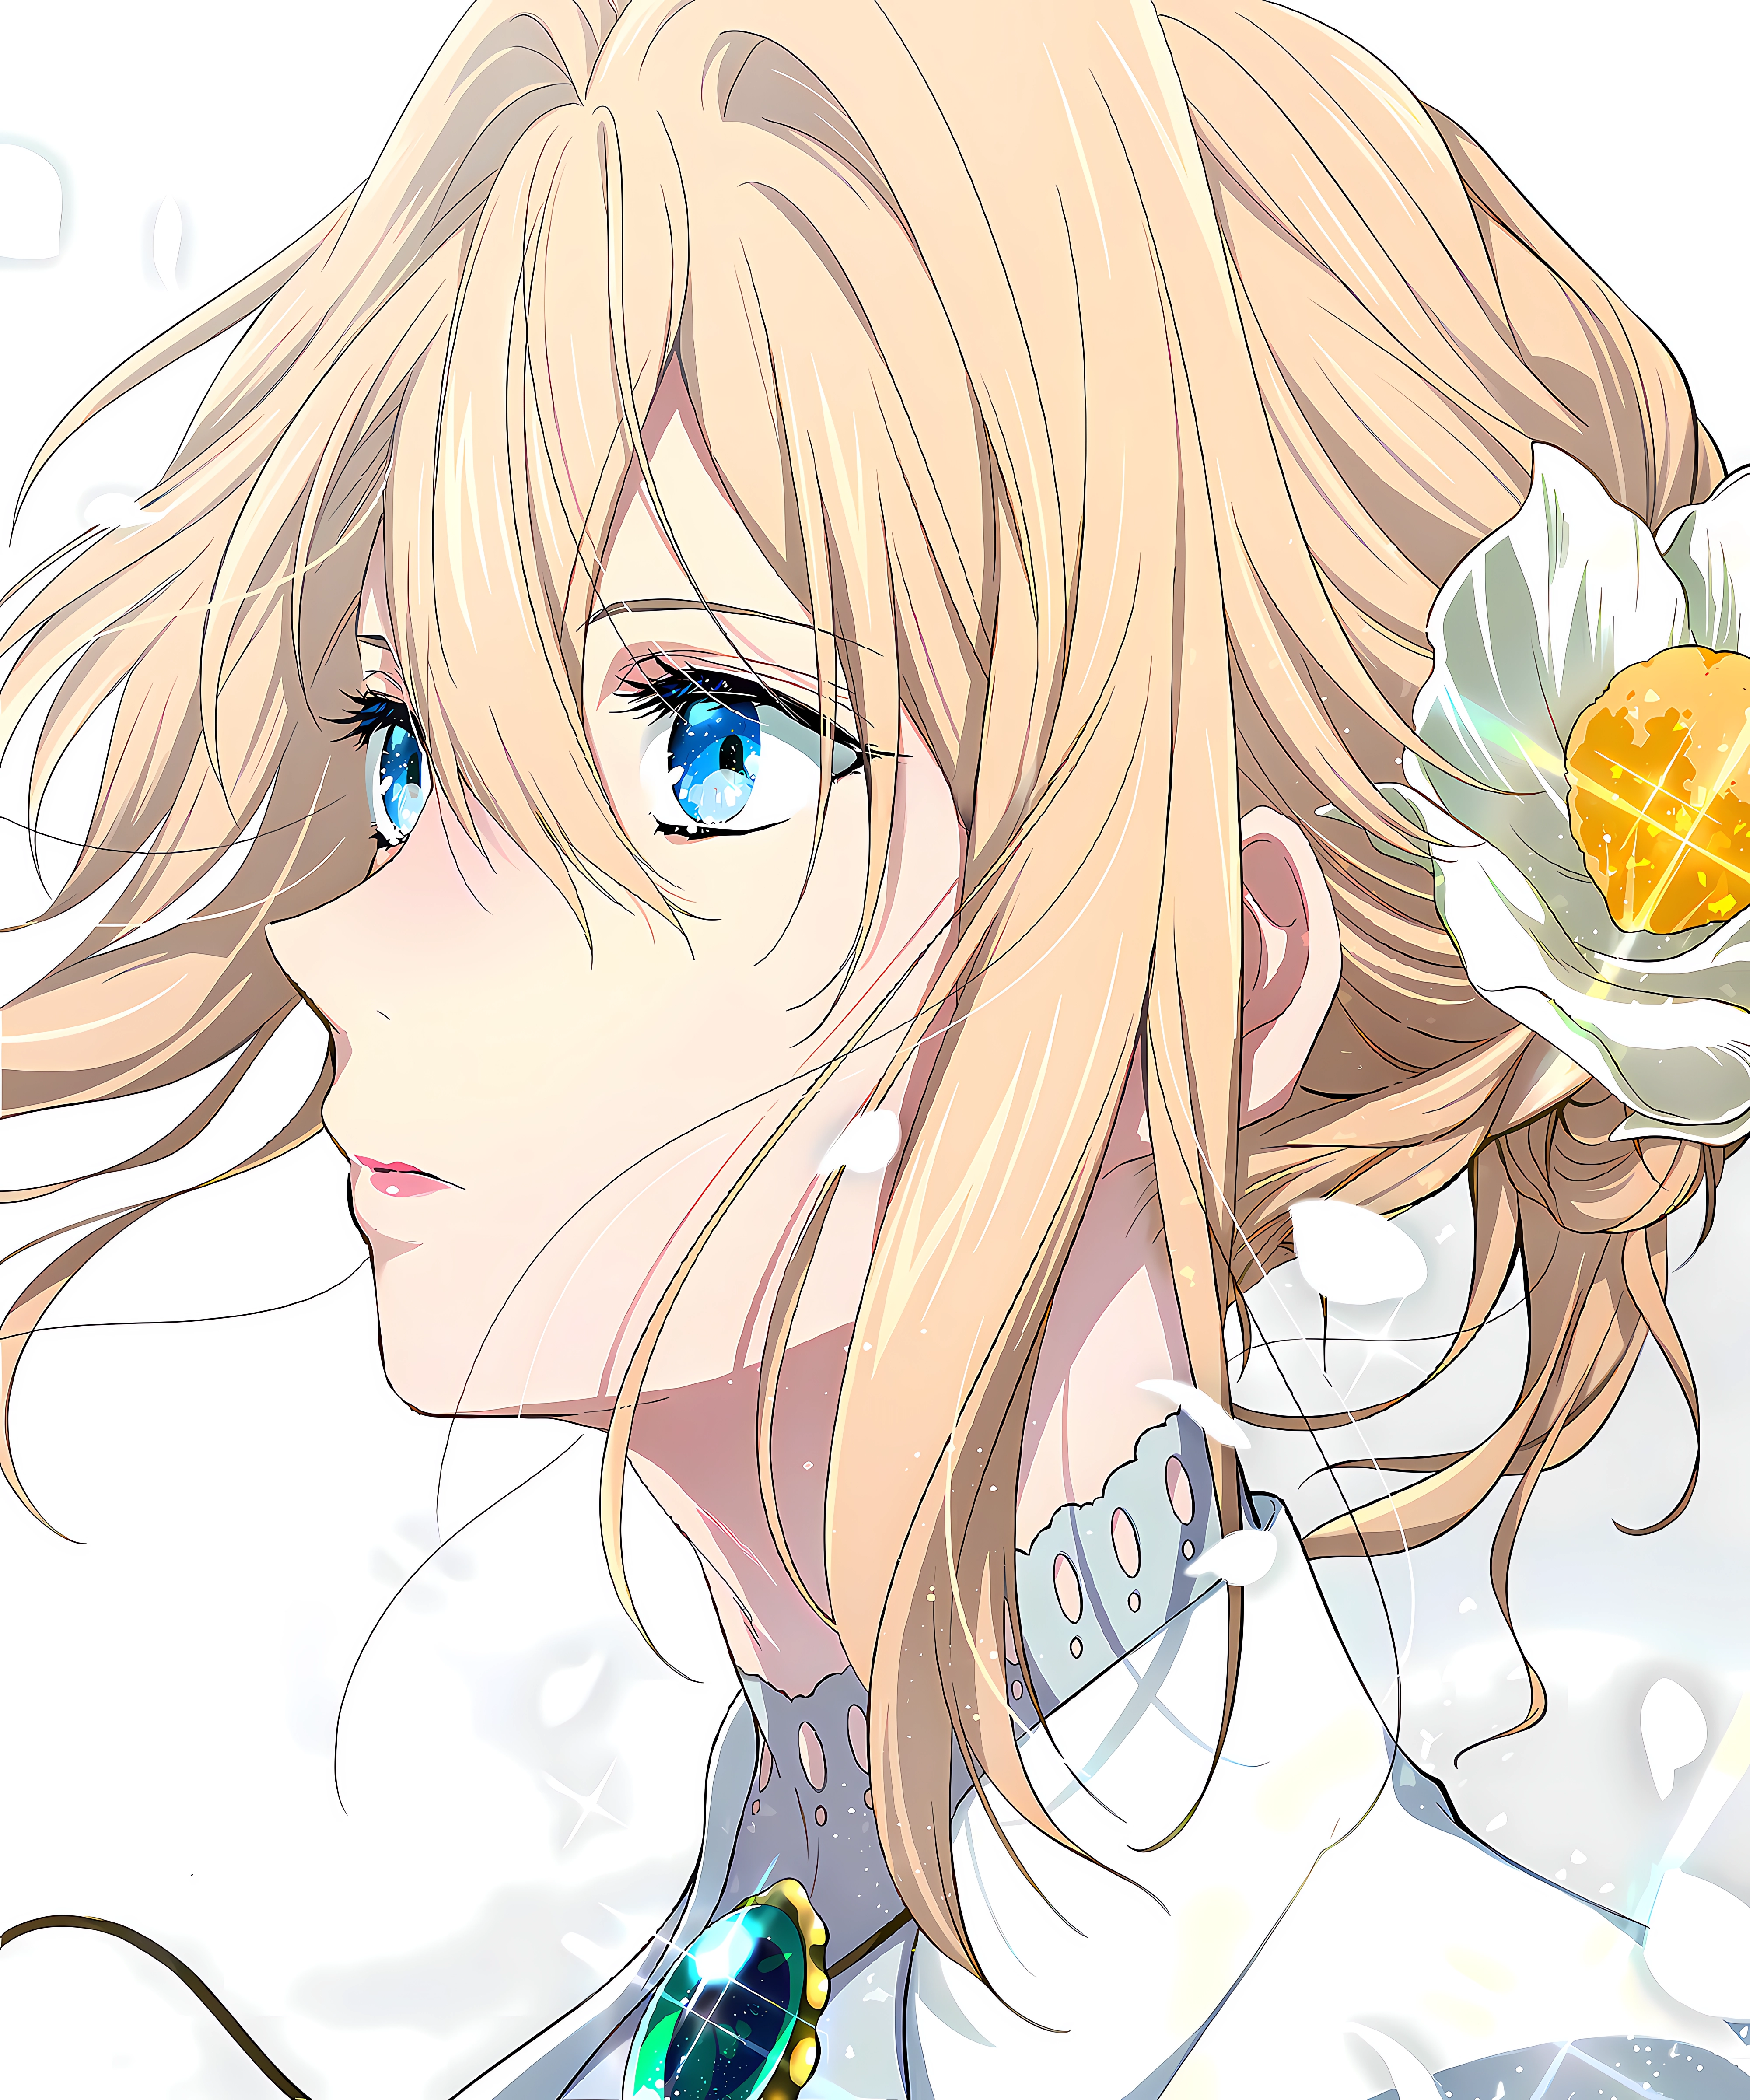 Anime 4000x4800 anime anime girls portrait display blonde Violet Evergarden (character) Violet Evergarden blue eyes looking away short hair flower in hair petals flowers minimalism simple background white background